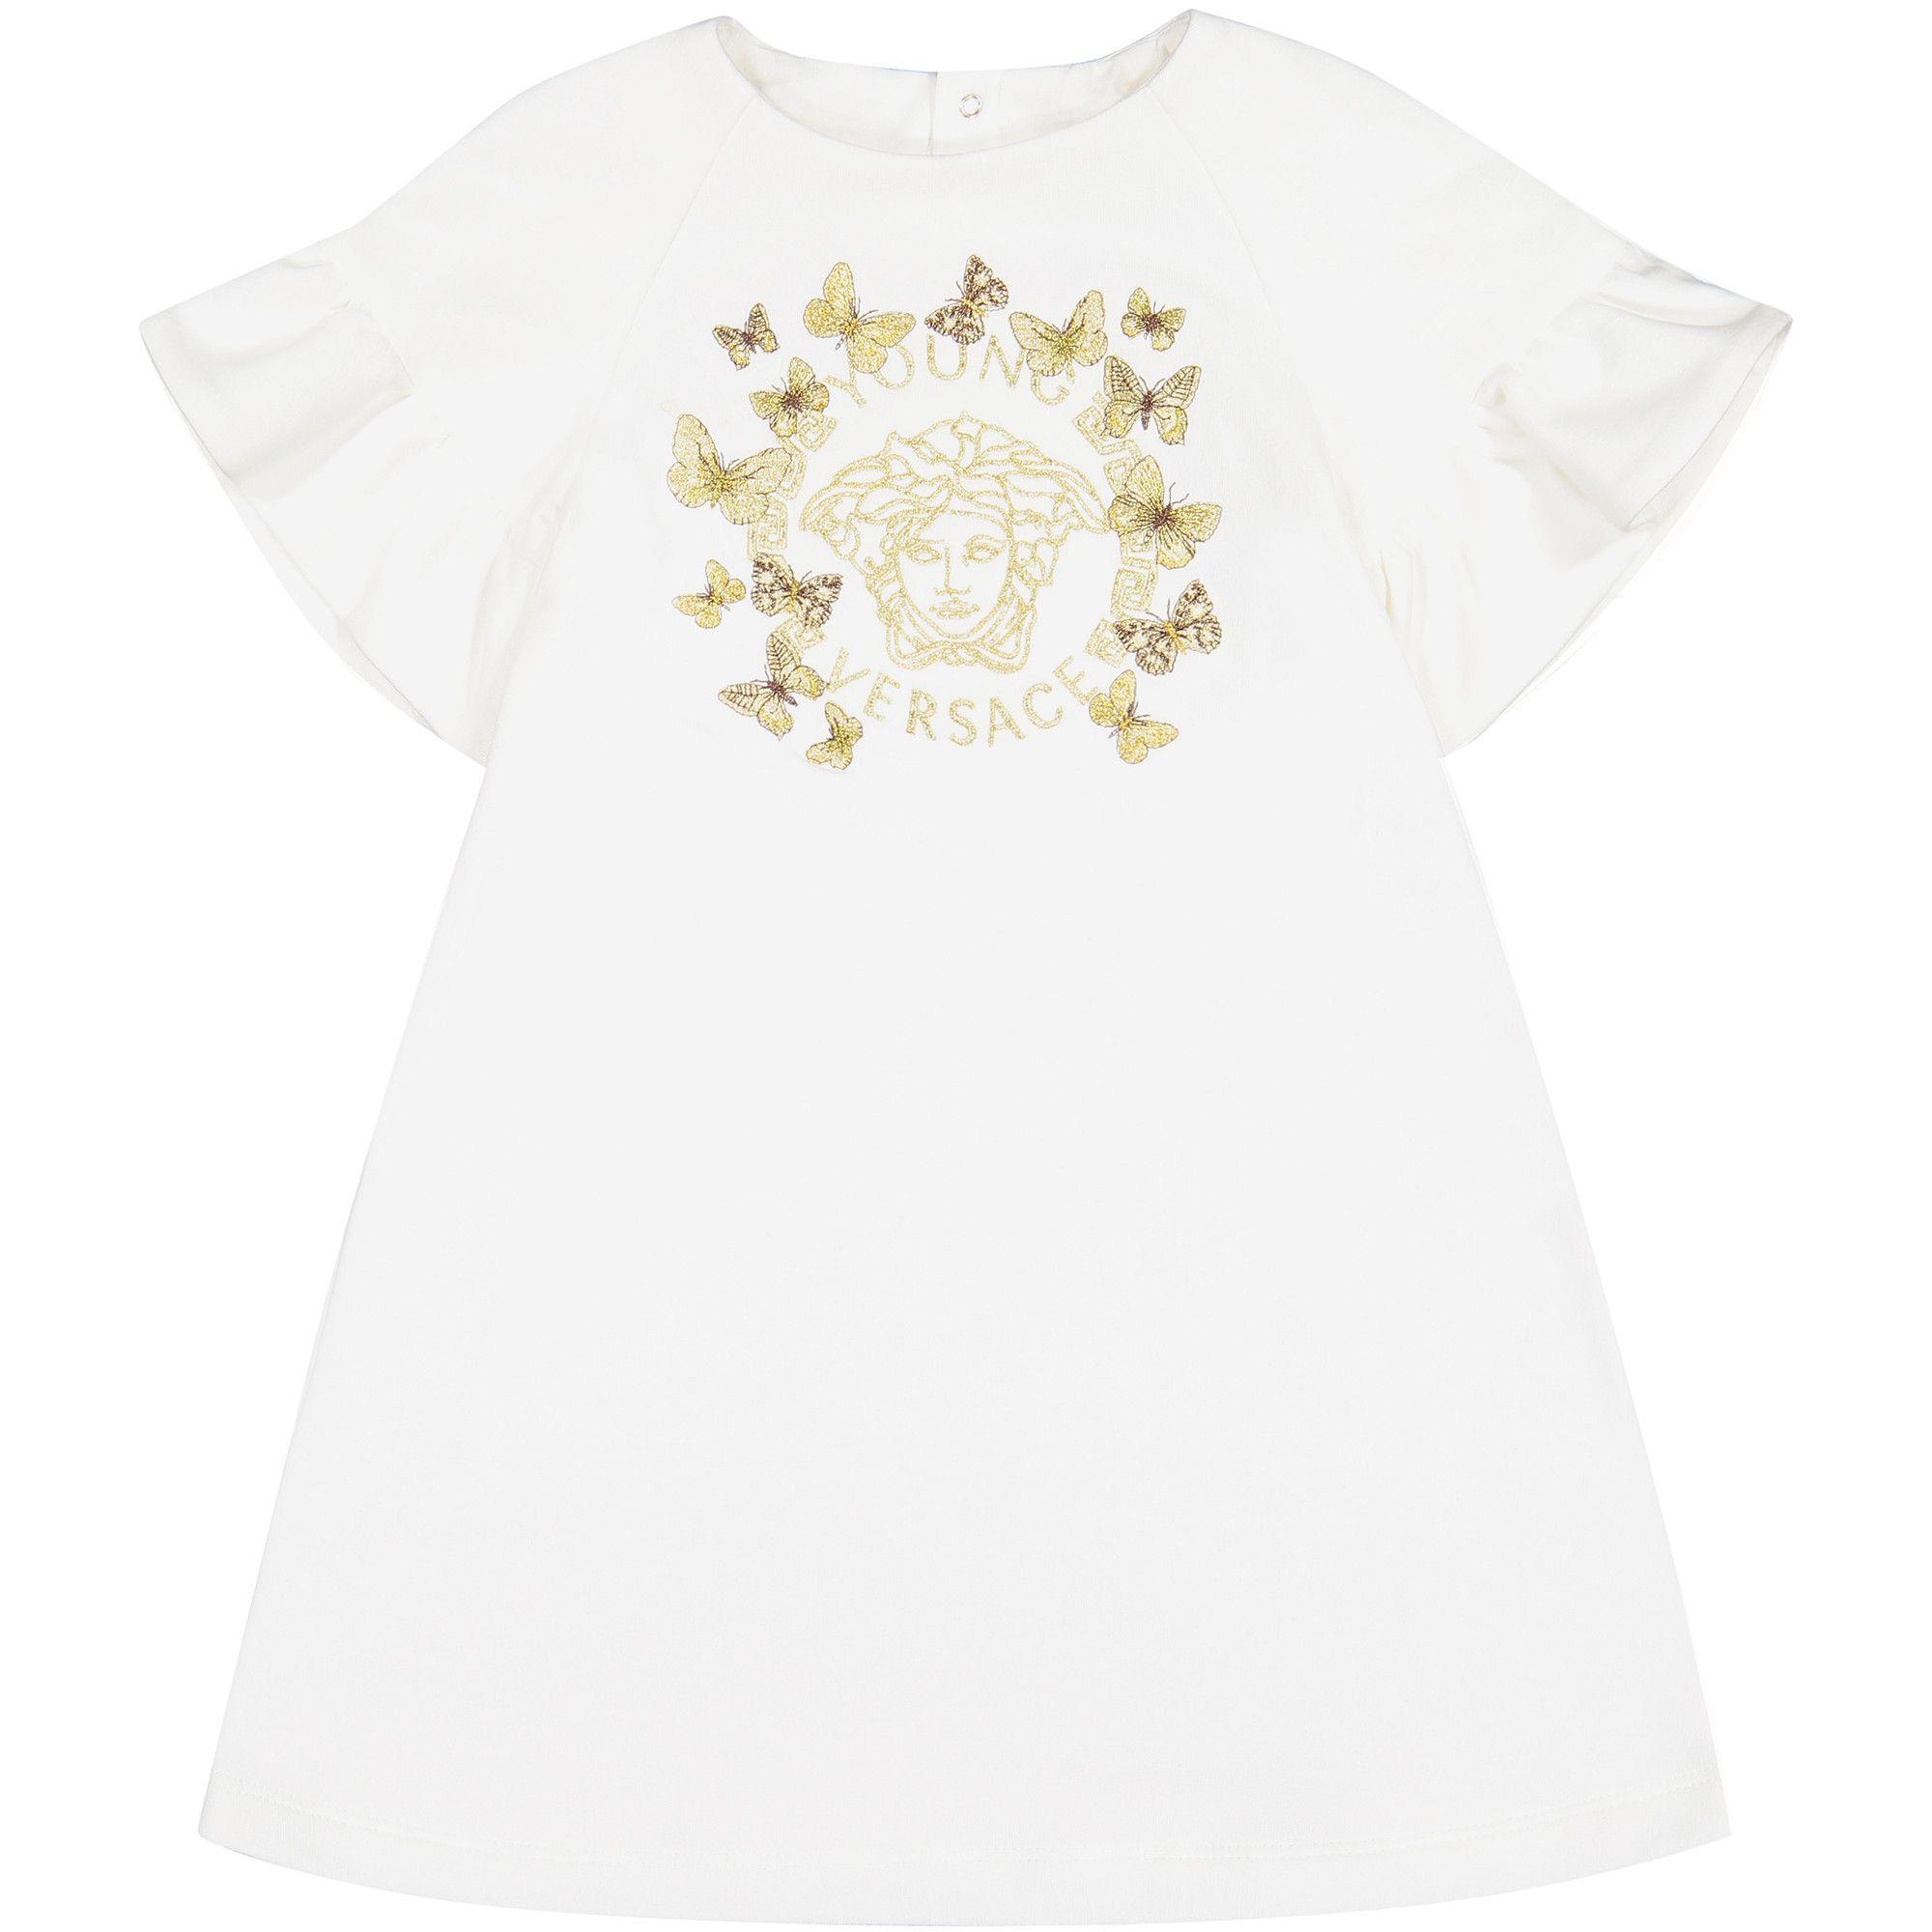 Gold Dress Logo - Young Versace Baby Dress with Gold Logo Butterfly Print